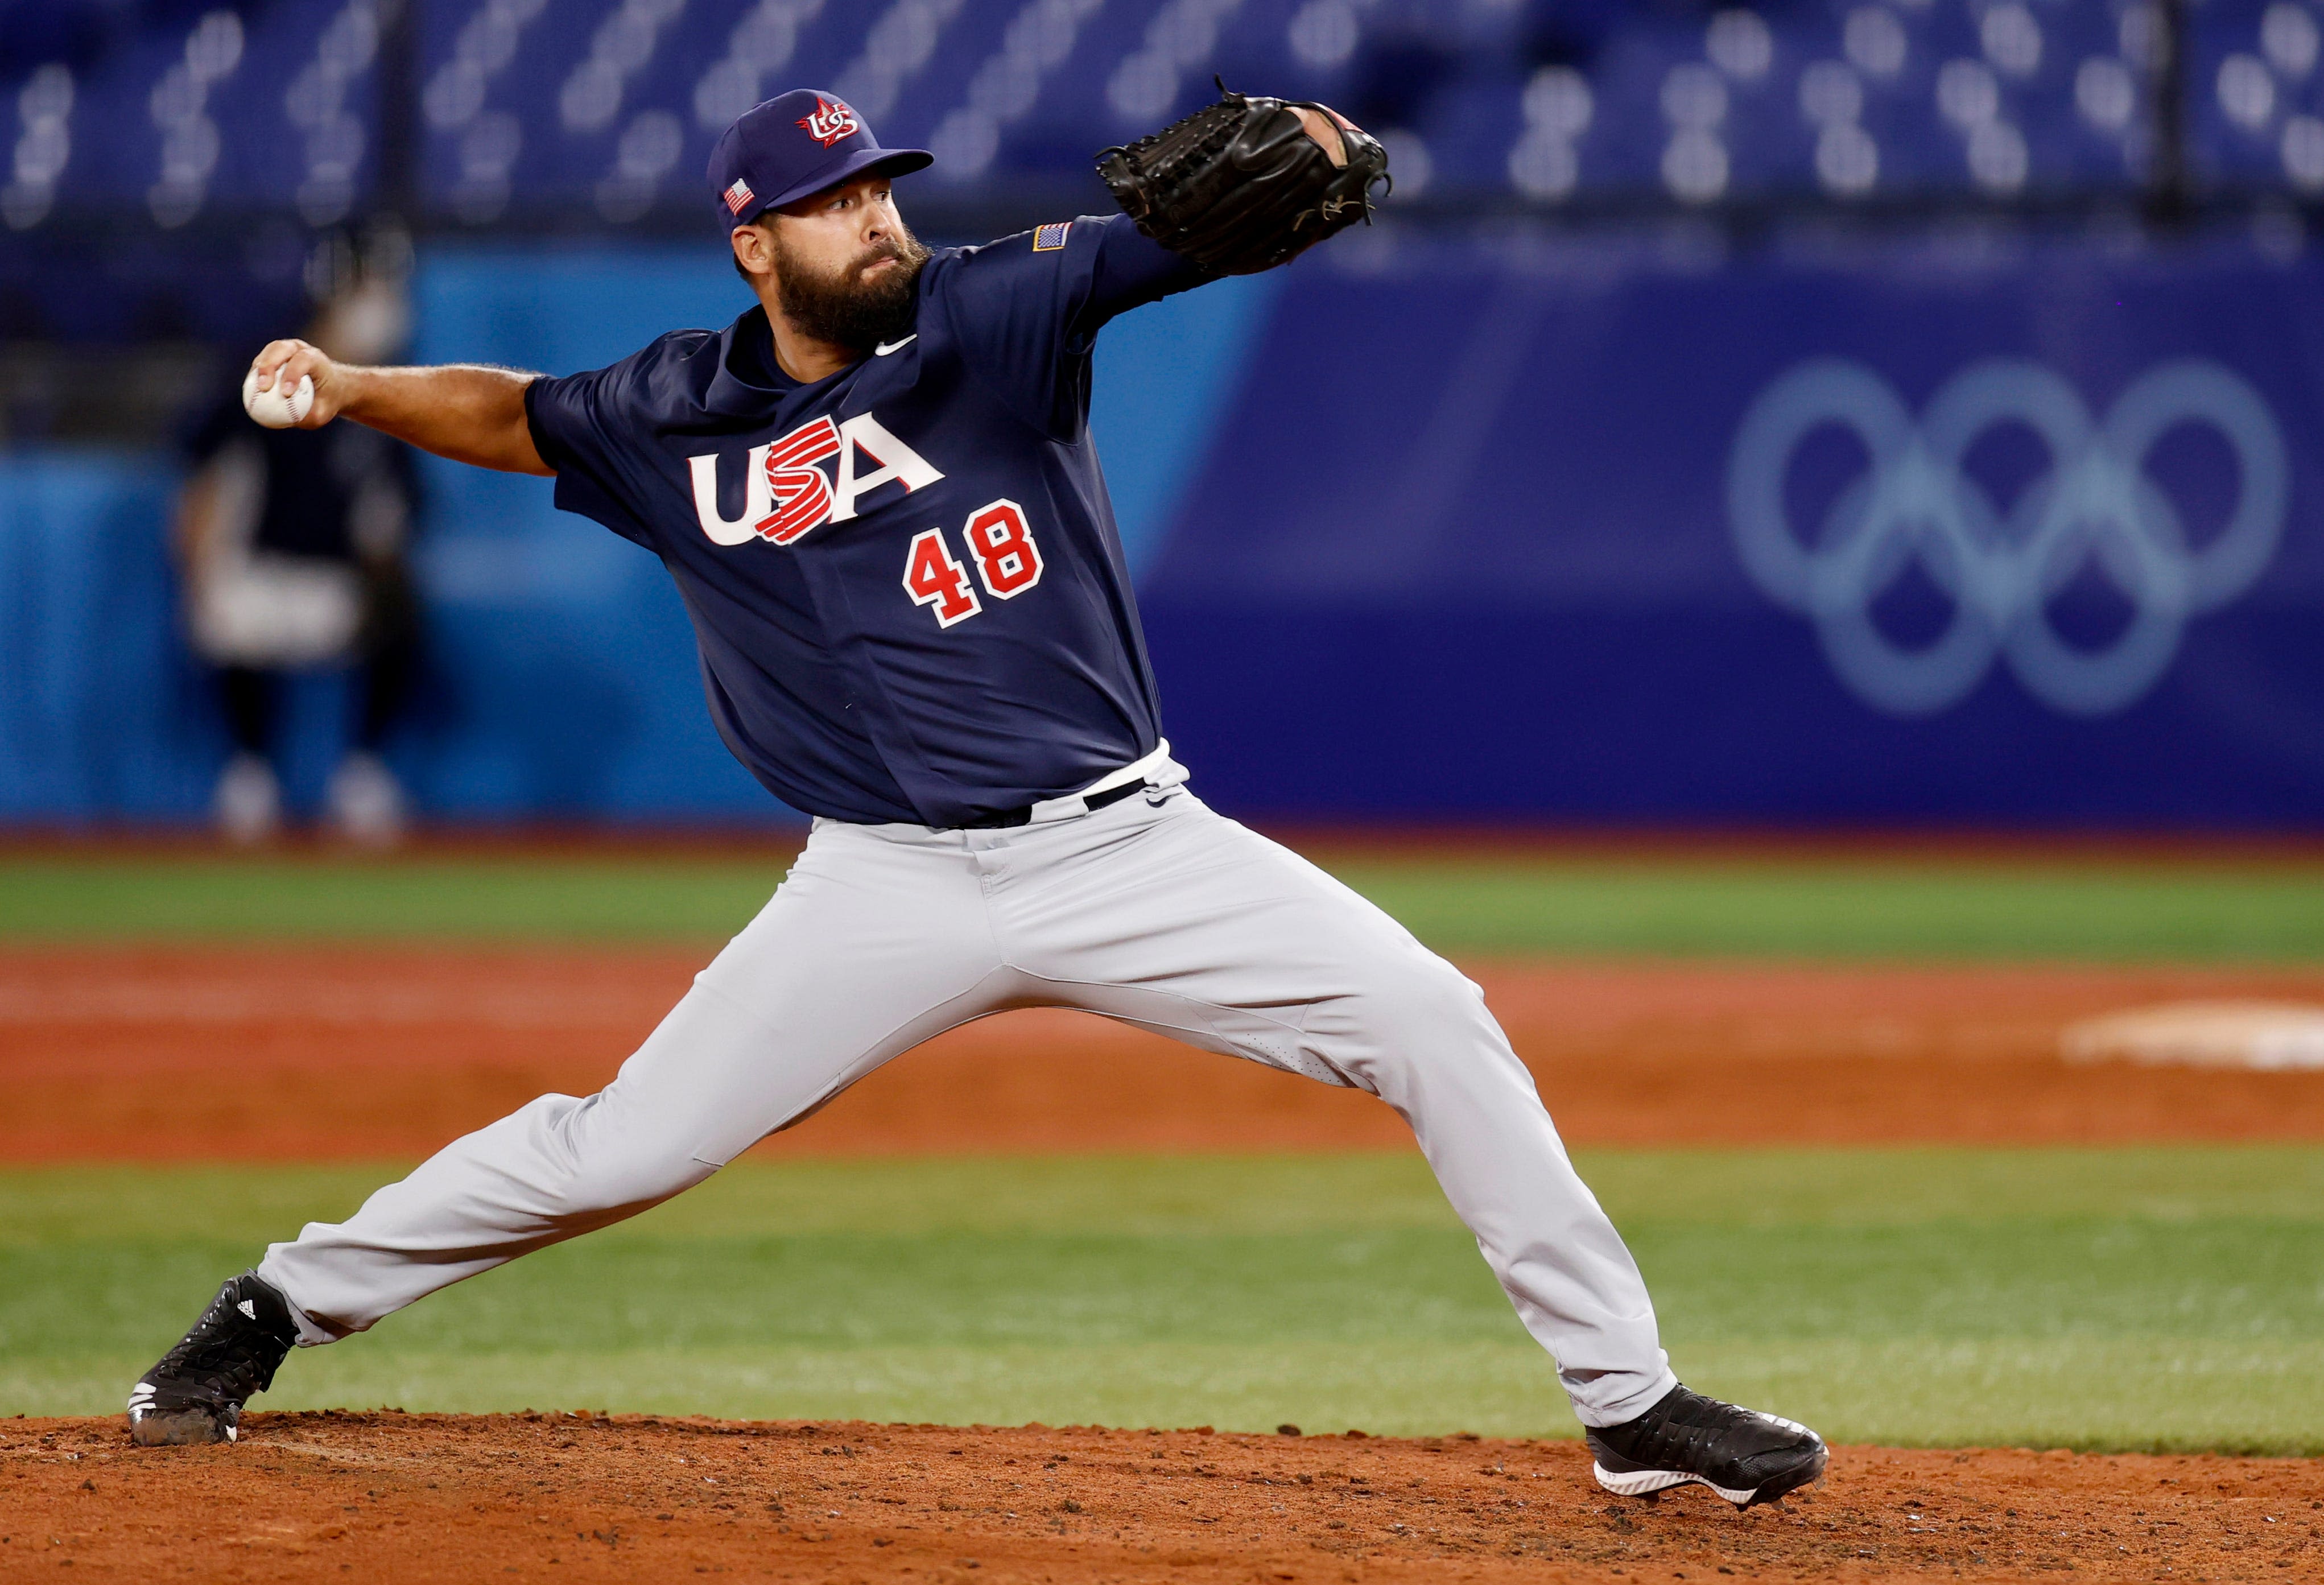 Is baseball in the 2024 Paris Olympics? Sport will be absent from 2024 Games before 2028 return